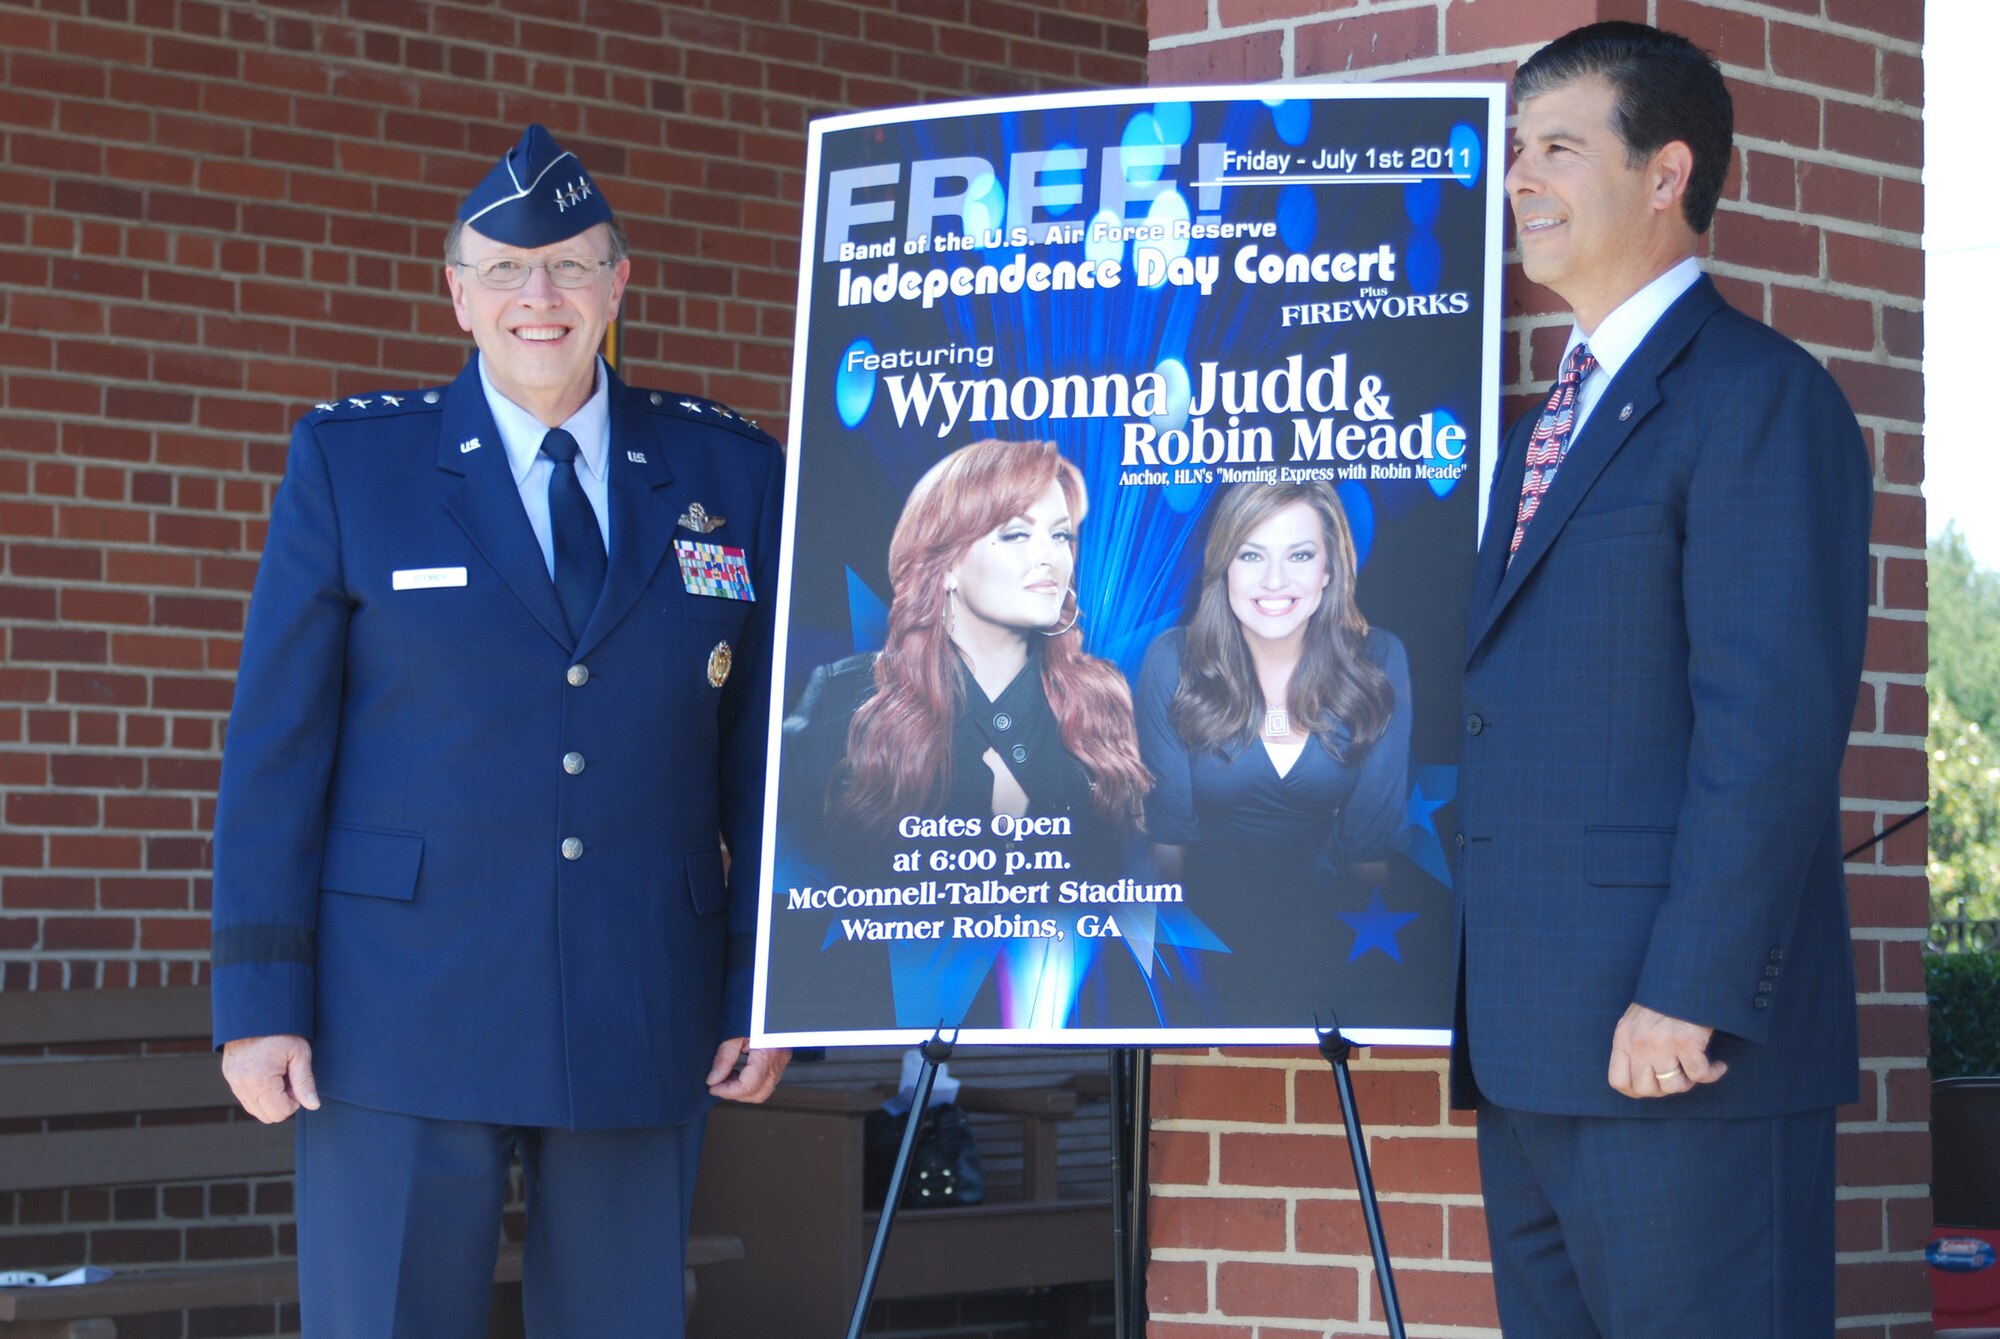 Lt. Gen. Charles E. Stenner Jr., commander of Air Force Reserve Command and Chuck Shaheen, mayor of Warner Robins, unveil the guest artists for the 2011 Independence Day concert. Five-time Grammy winner Wynonna Judd and Robin Meade of HLN's "Morning Express with Robin Meade" are the featured artists for the concert at McConnell-Talbert stadium in Warner Robins July 1. Gates open at 6 p.m. and the concert starts at 8. (U.S. Air Force photo/Mr Bo Joyner)